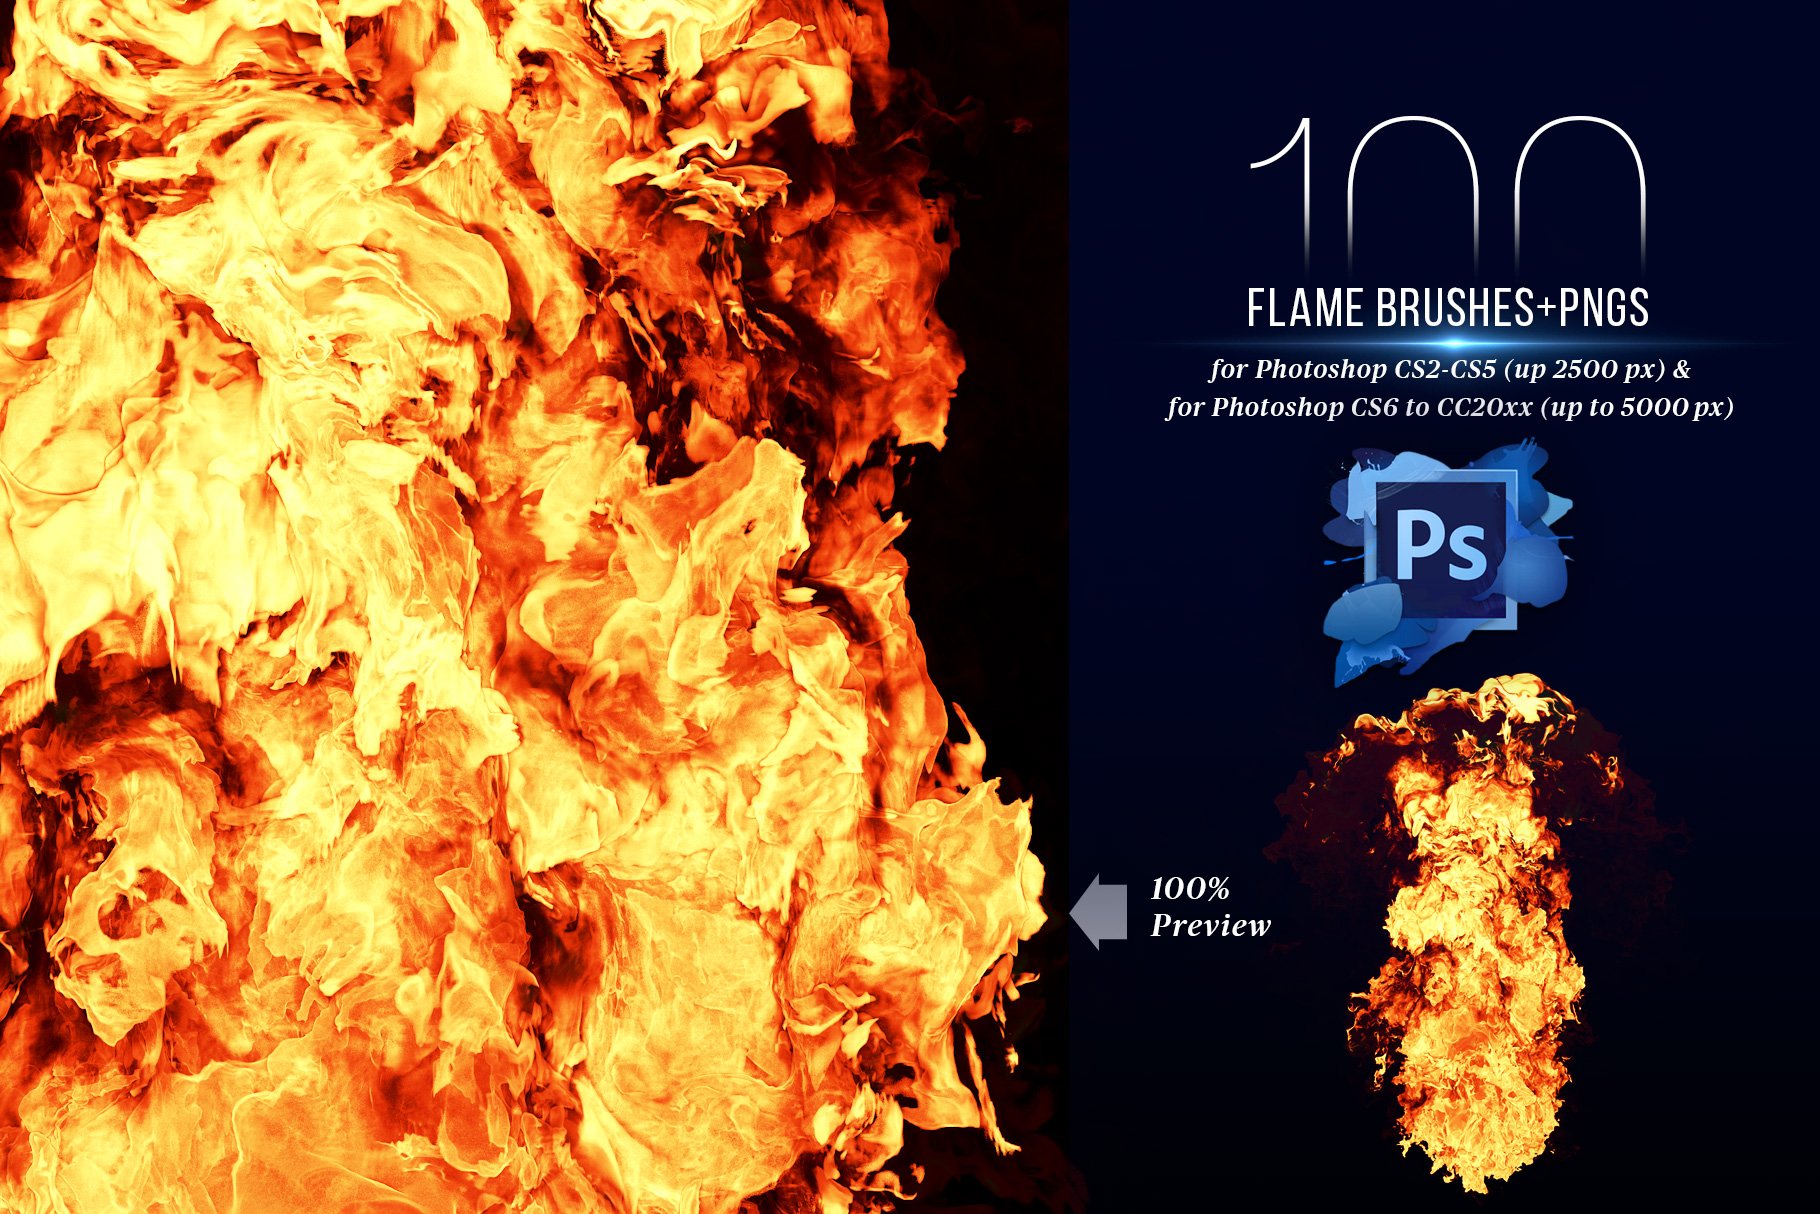 100 Photoshop Flame Brushes + PNGspreview image.